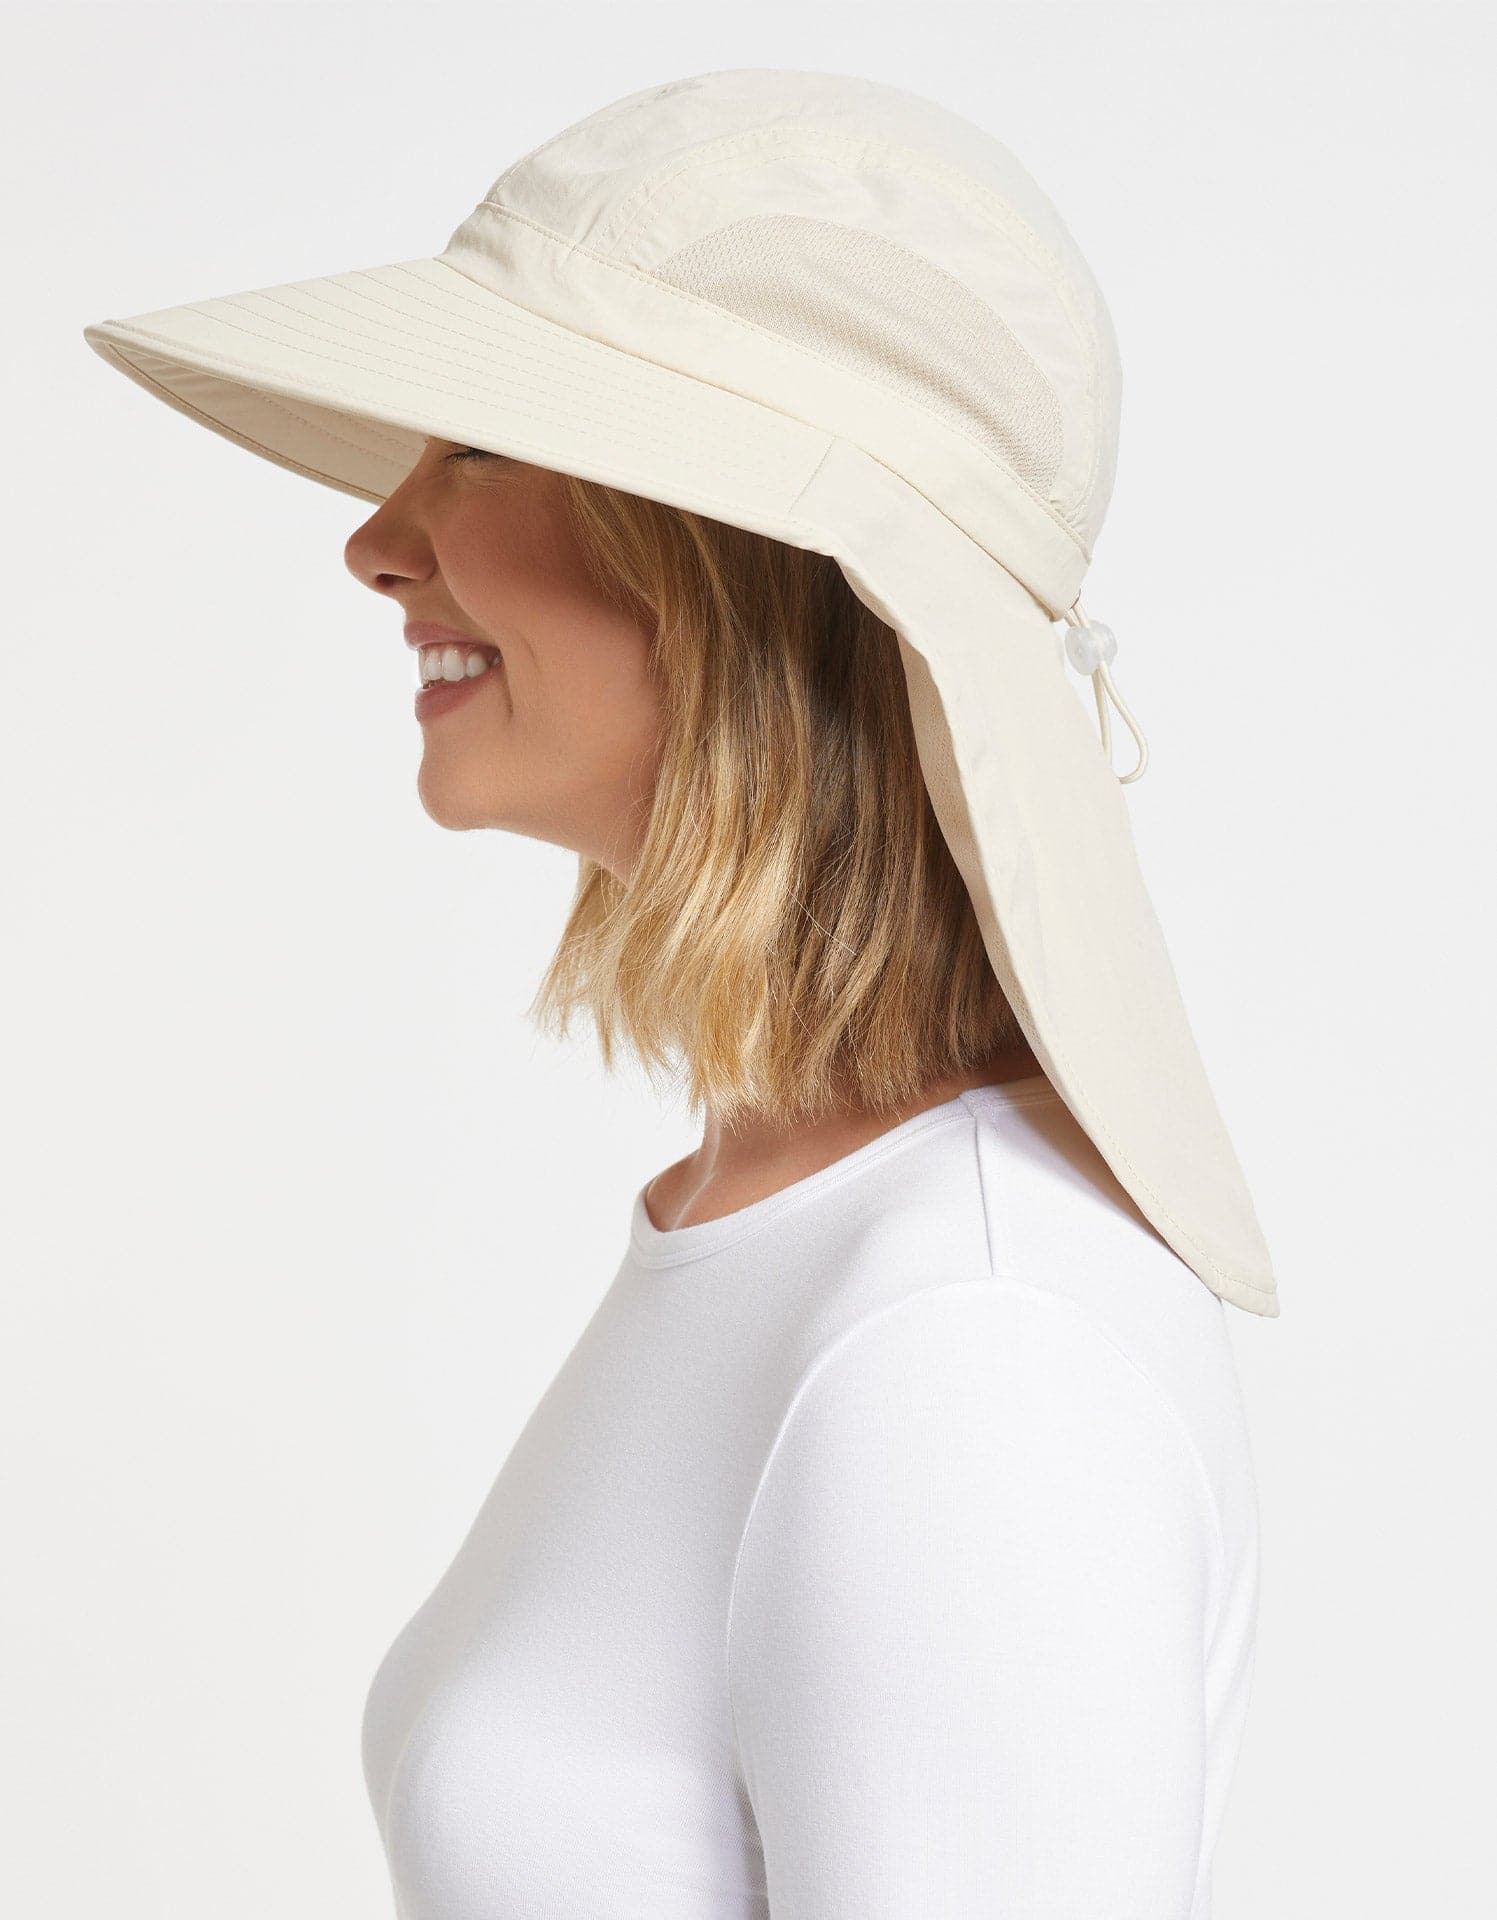 Outback Travel Hat Upf 50+ For Women | Sun Protection Beige